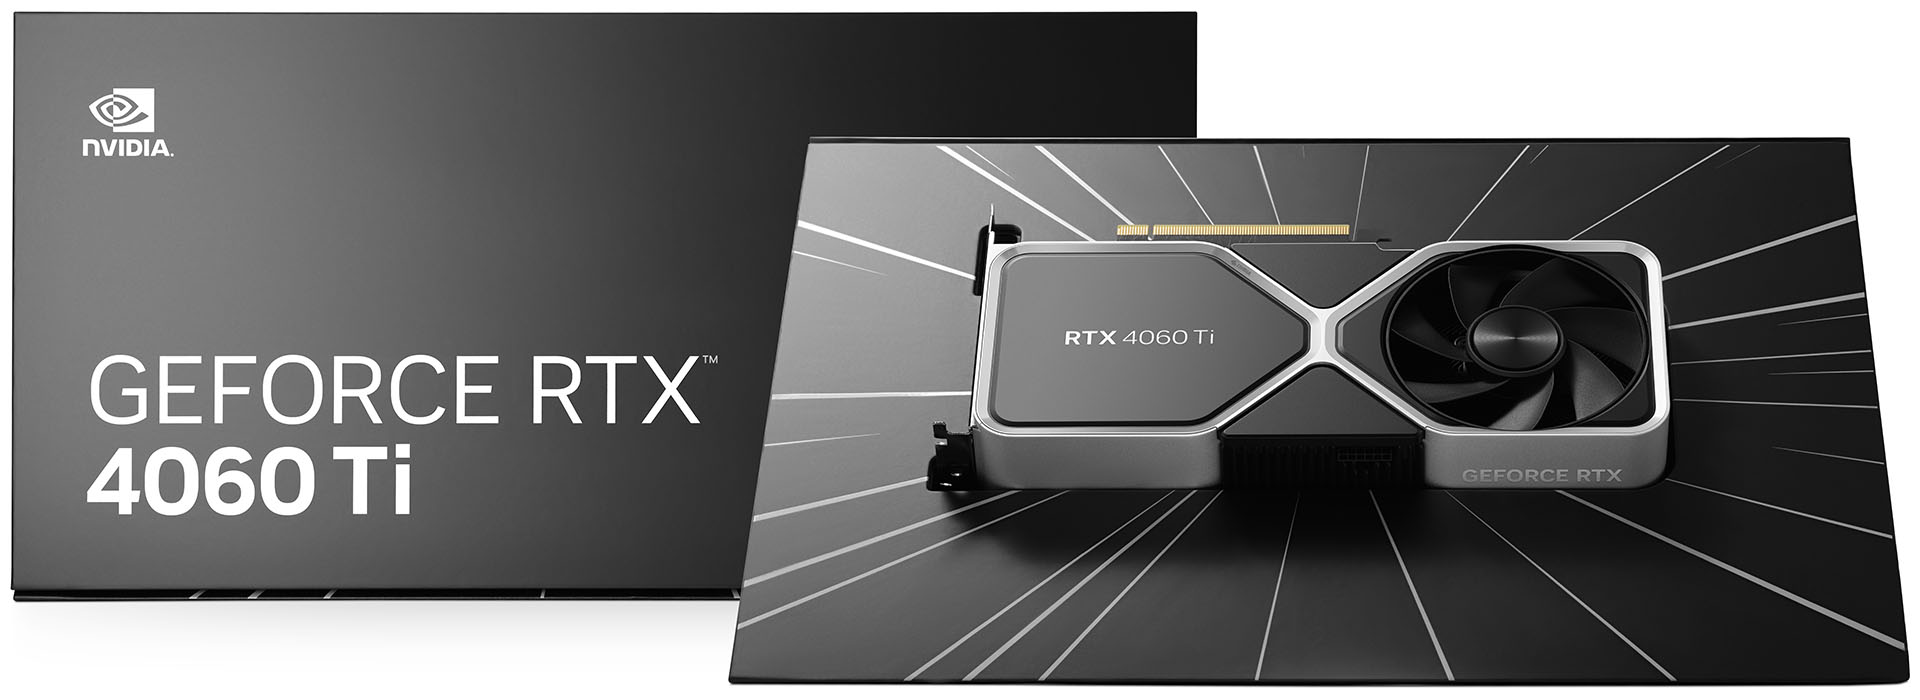 NVIDIA GeForce RTX 4060 Ti Packaging